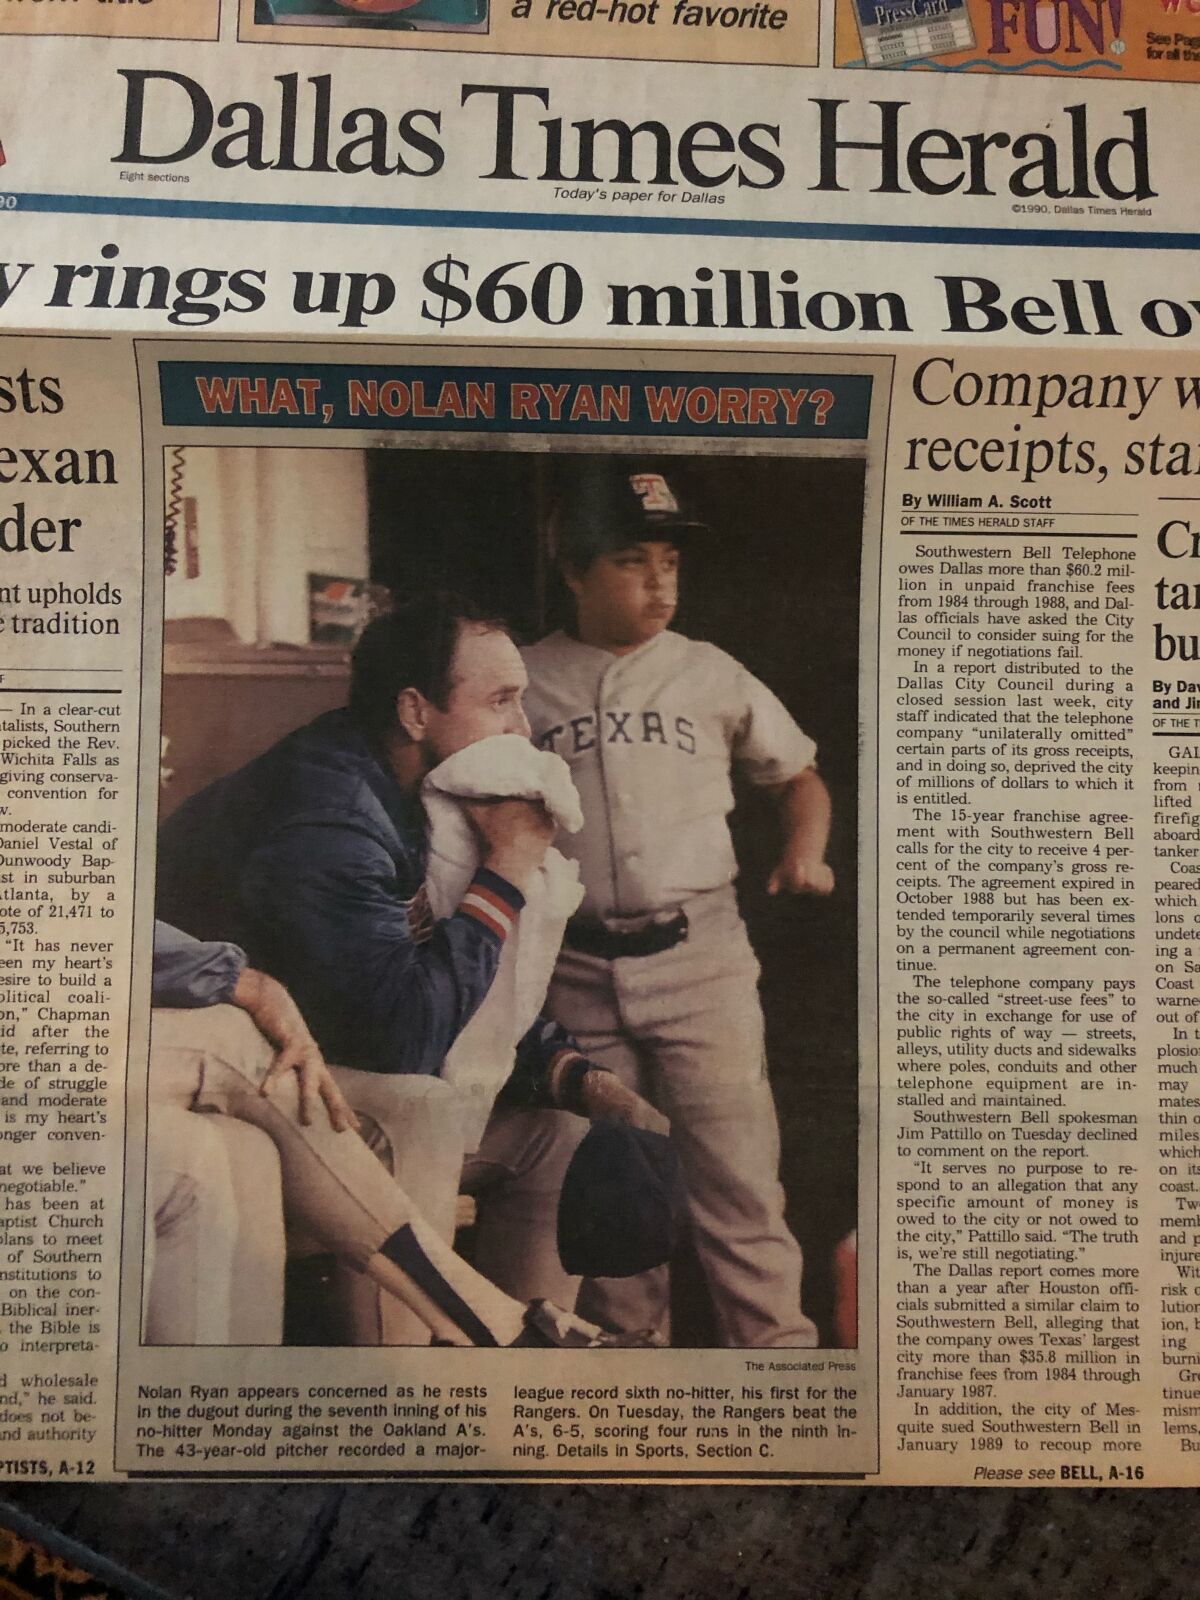 Front page of the Dallas Times Herald on June 12, 1990 featuring a young Perry Minasian with Texas Rangers' Nolan Ryan.